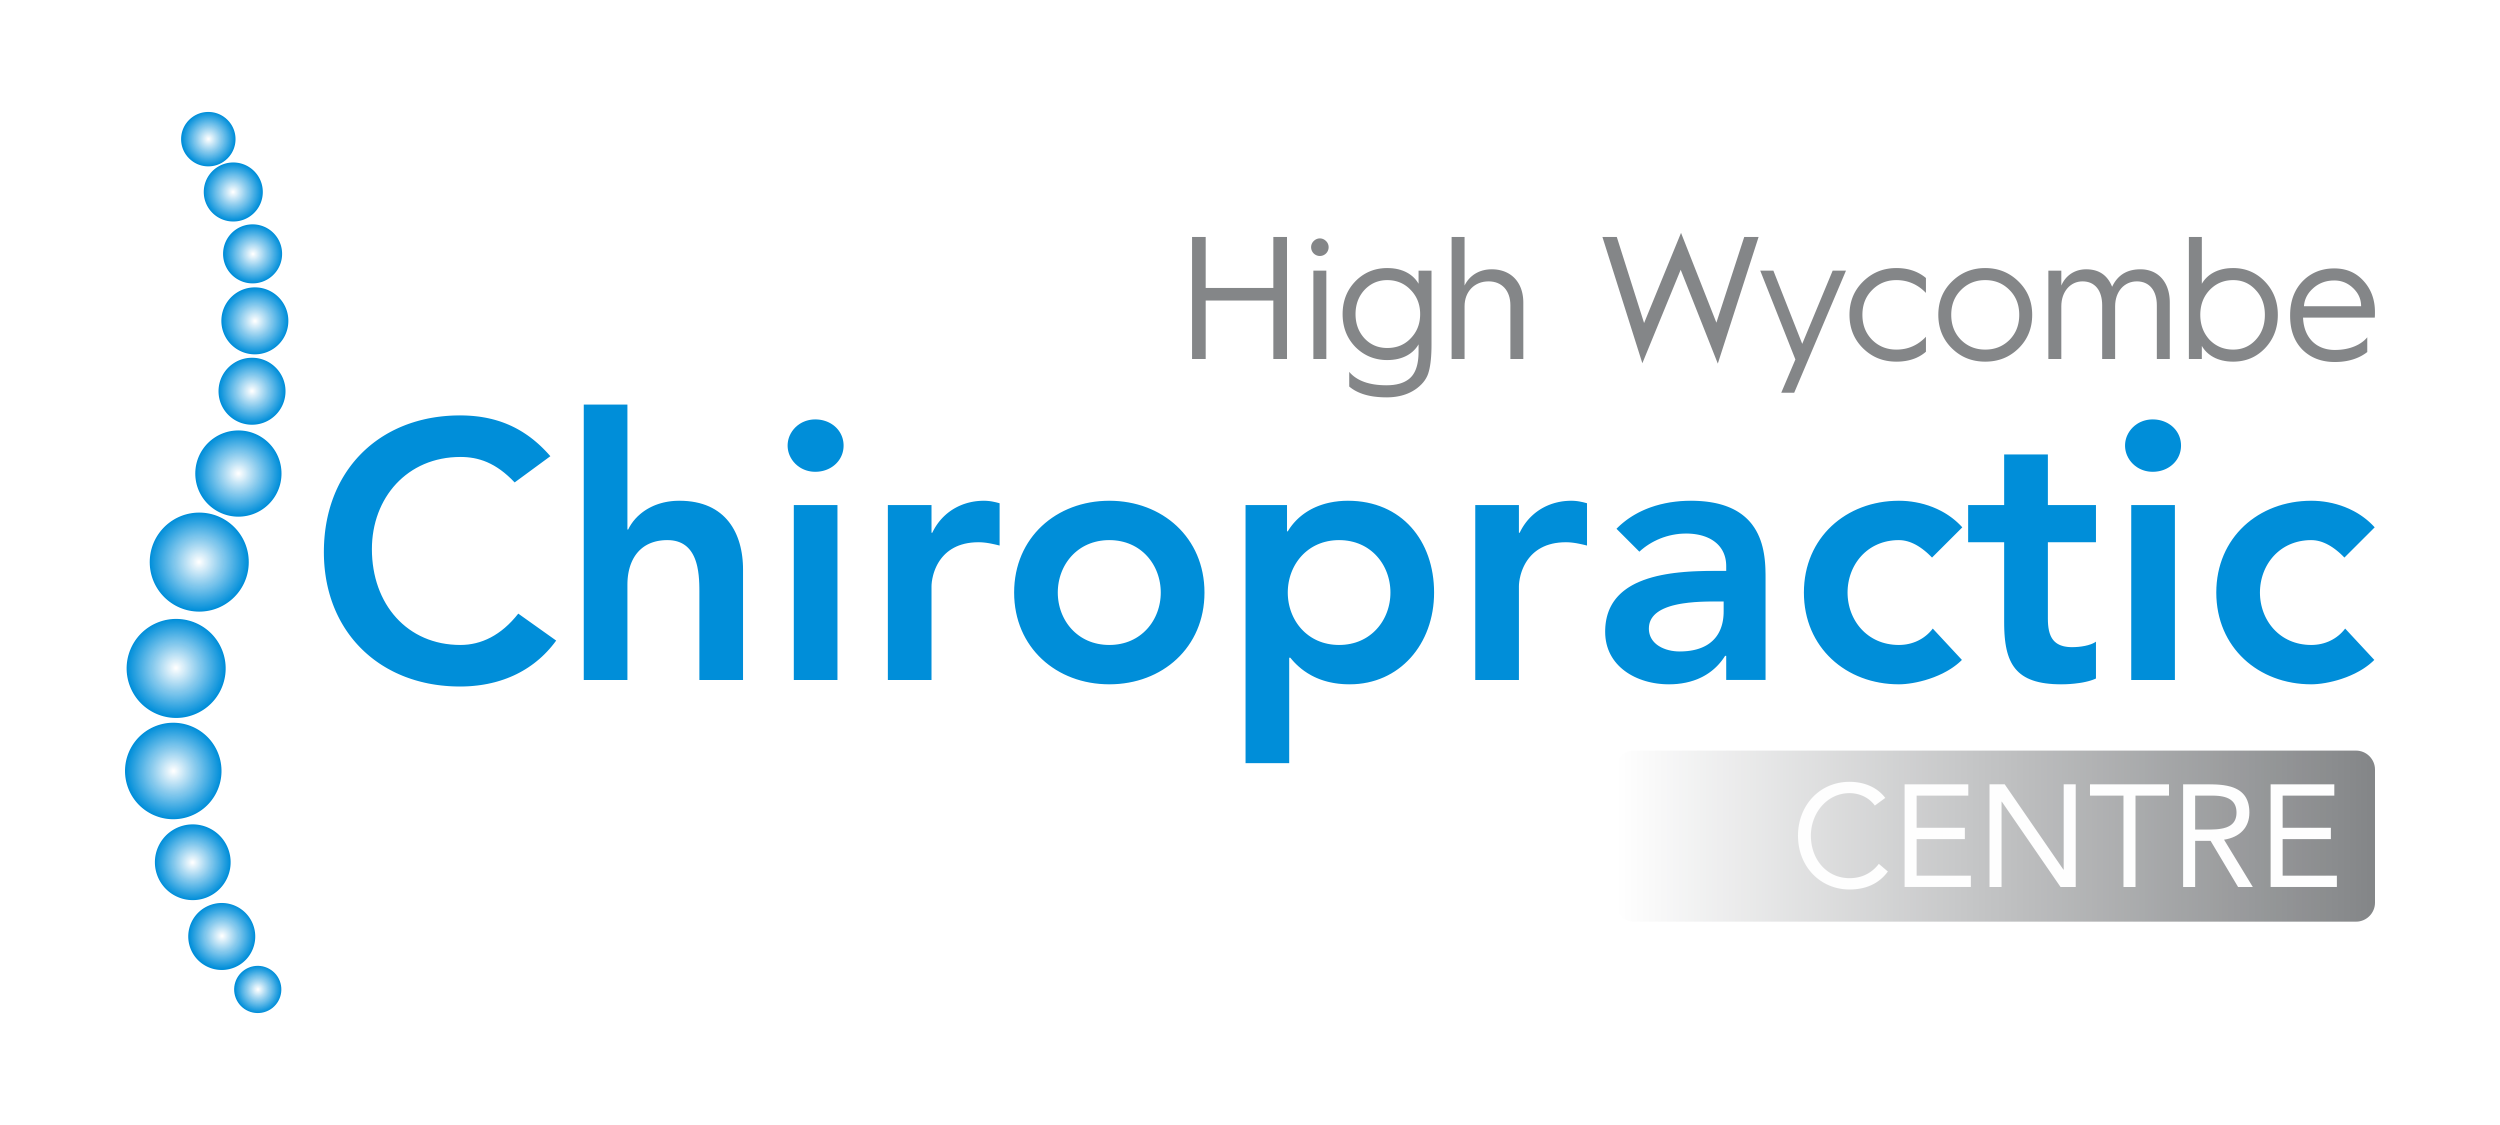 high-wycombe-chiropractic-logo.png